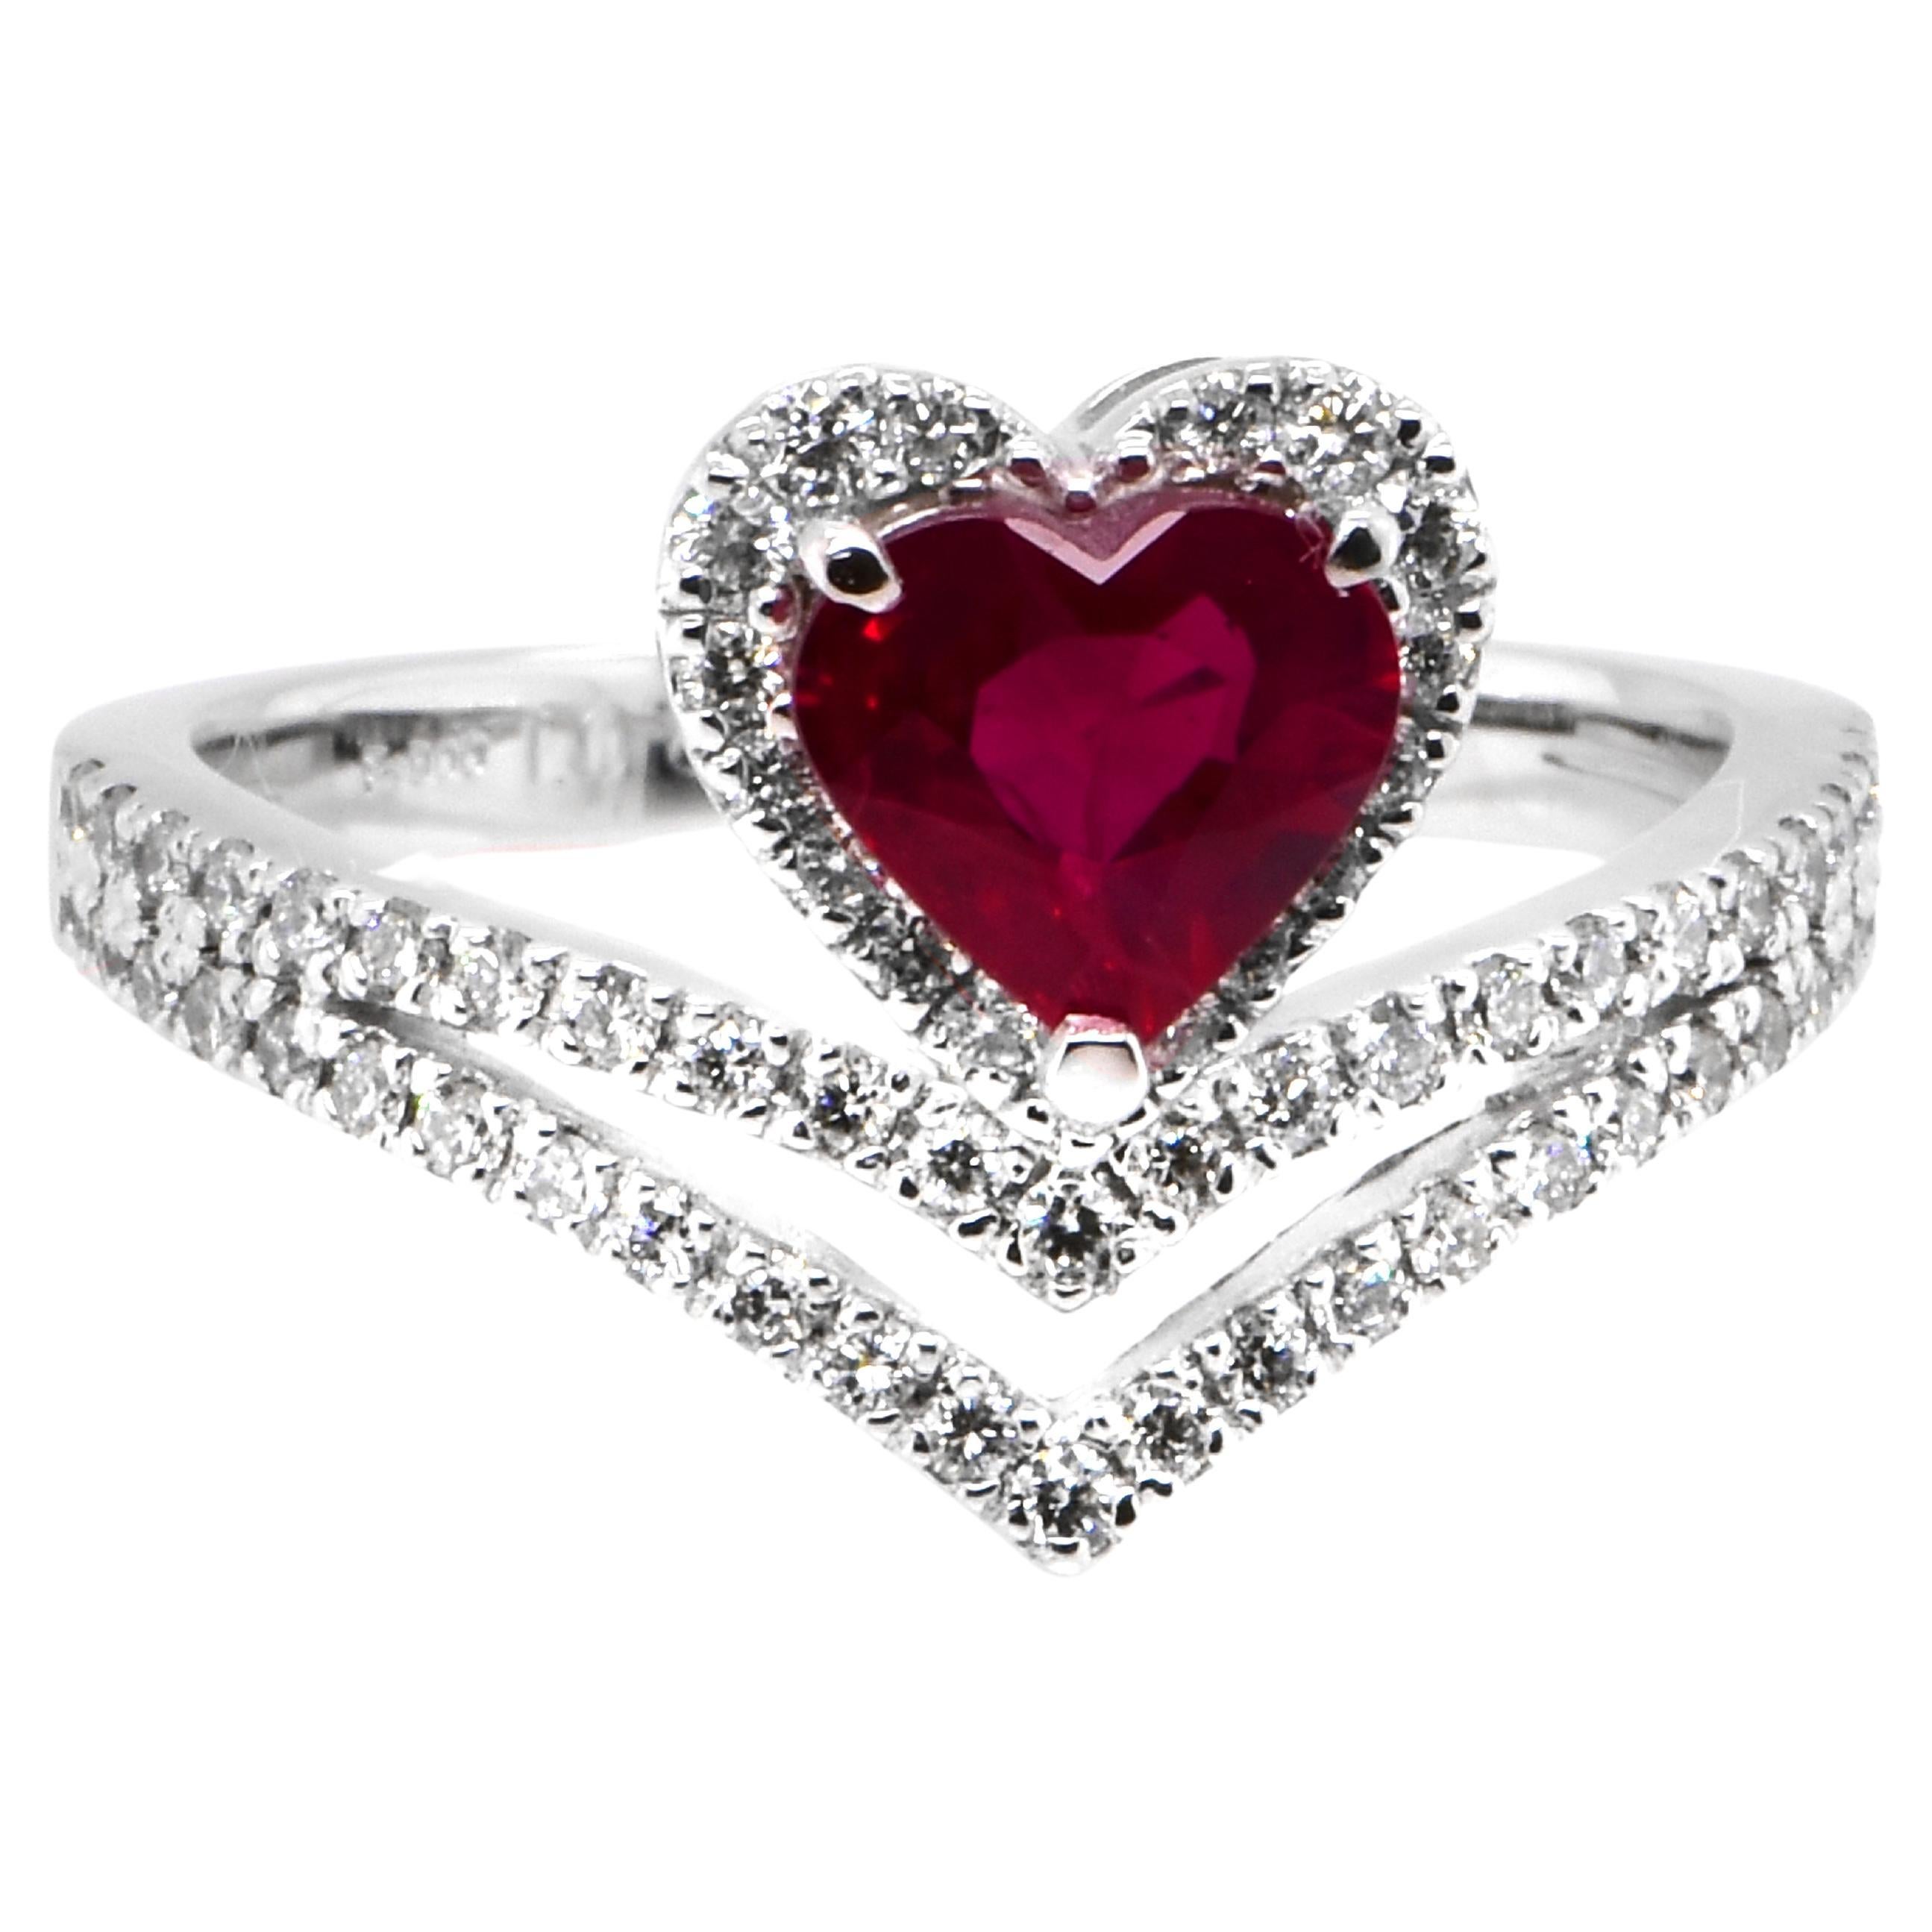 GIA Certified 1.08 Carat, Pigeon Blood Red, Burmese Ruby Ring Made in Platinum For Sale